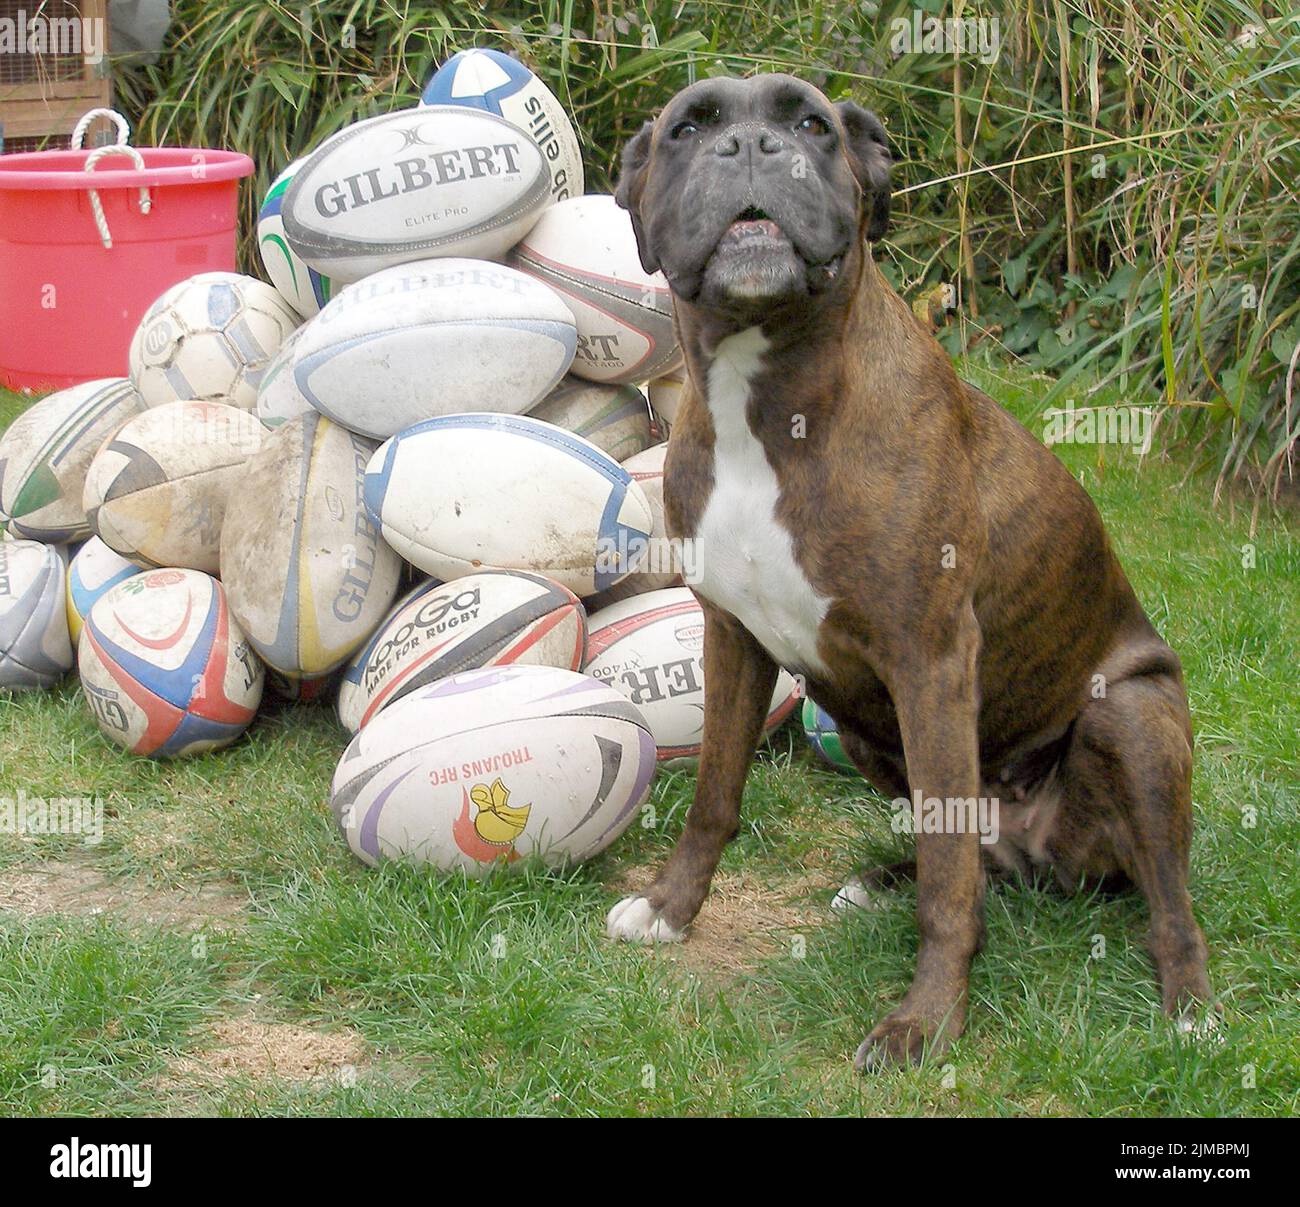 BALLS  Bess the Boxer has been given life membership of her local rugby club after saving them thousands of pounds by finding their lost balls.  The eight year old brindle has found more than 180 rugby balls in just three years as she enjoys her walks around the hedge that surrounds Havant Rugby Club in Hampshire.  Owners Bryan and Sue Perolls were amazed the first time that Bess found one of the £20 balls, thinking she was barking at a cat.   But now she finds them all the time and has saved the club over £3000.  Mr. Perolls , 55, said ‘’ Bess gets so excited when she finds a ball, she jumps Stock Photo